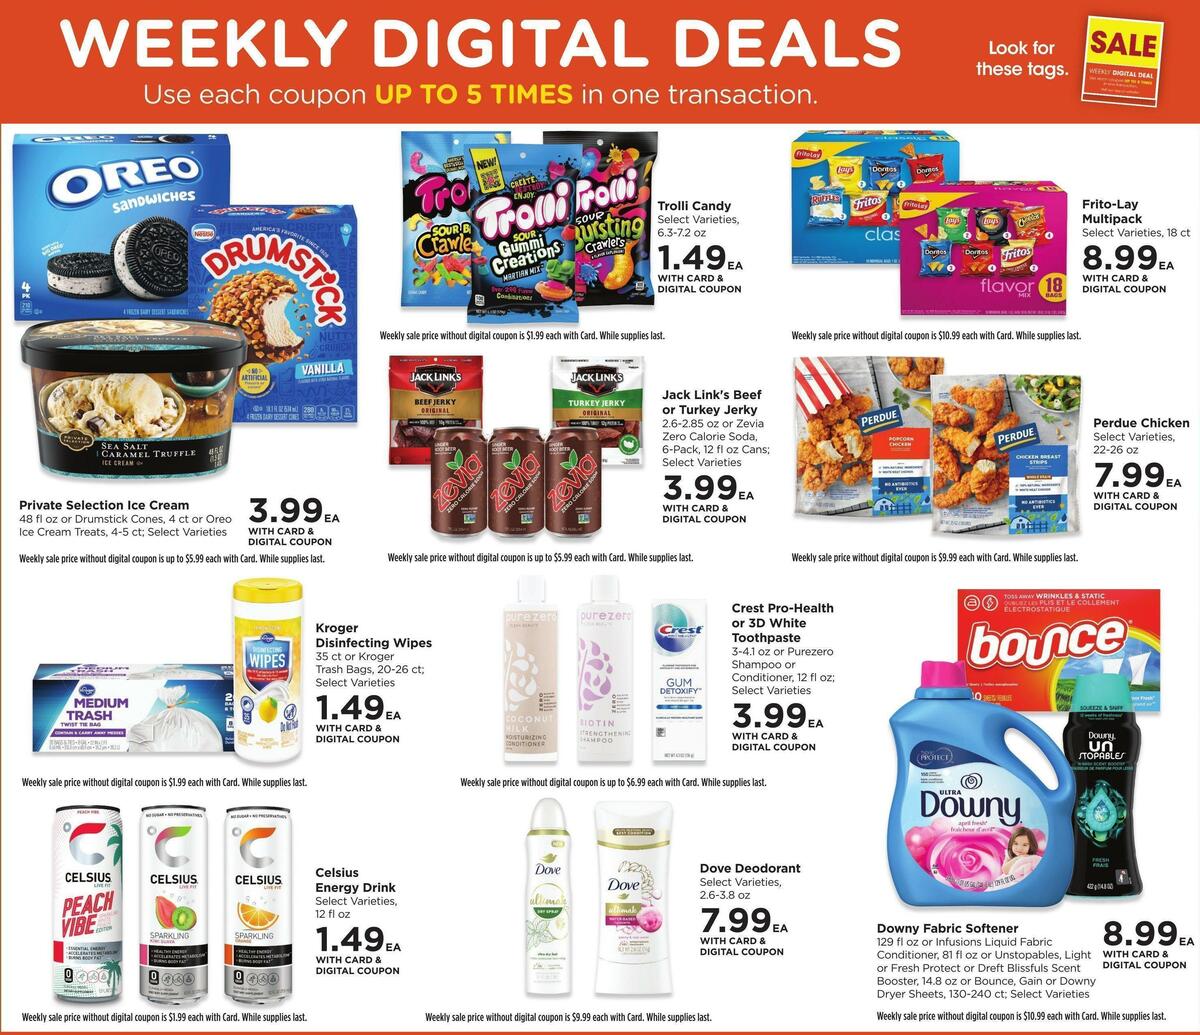 QFC Weekly Ad from May 17